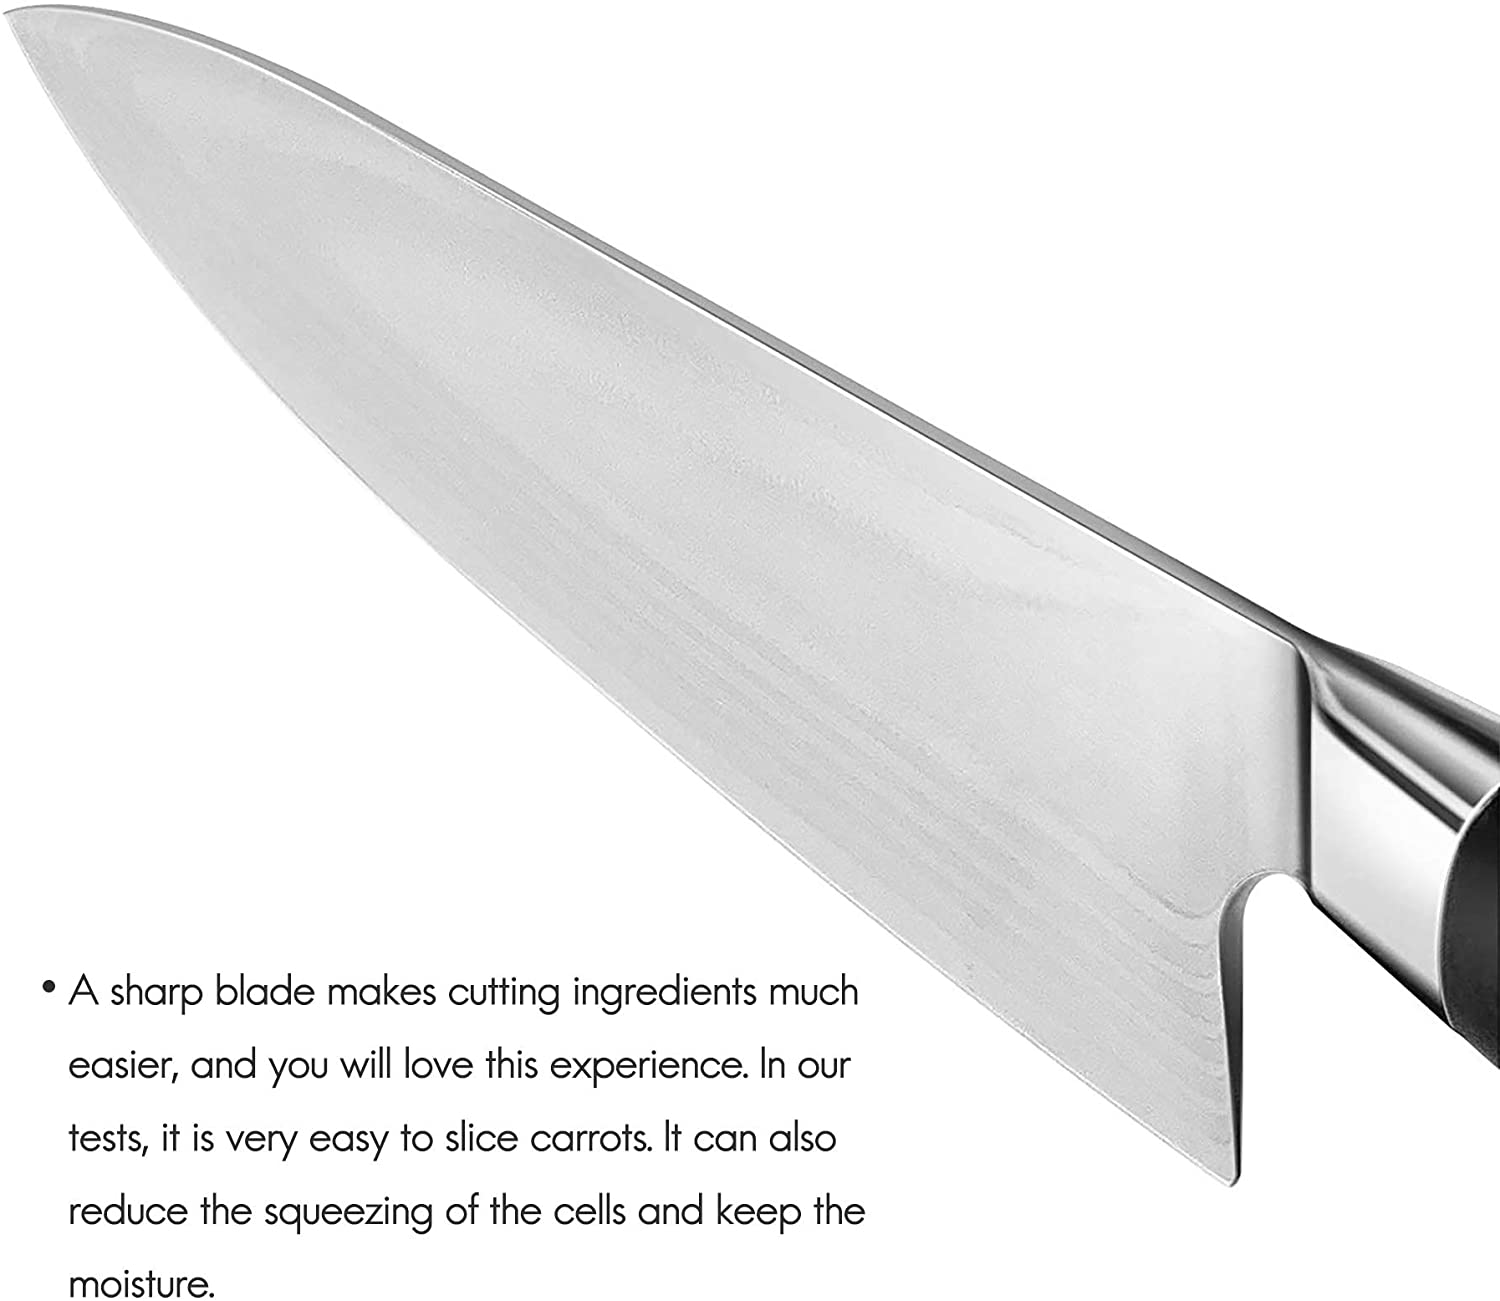 Buy 8 Classic Japanese Chef's Knife